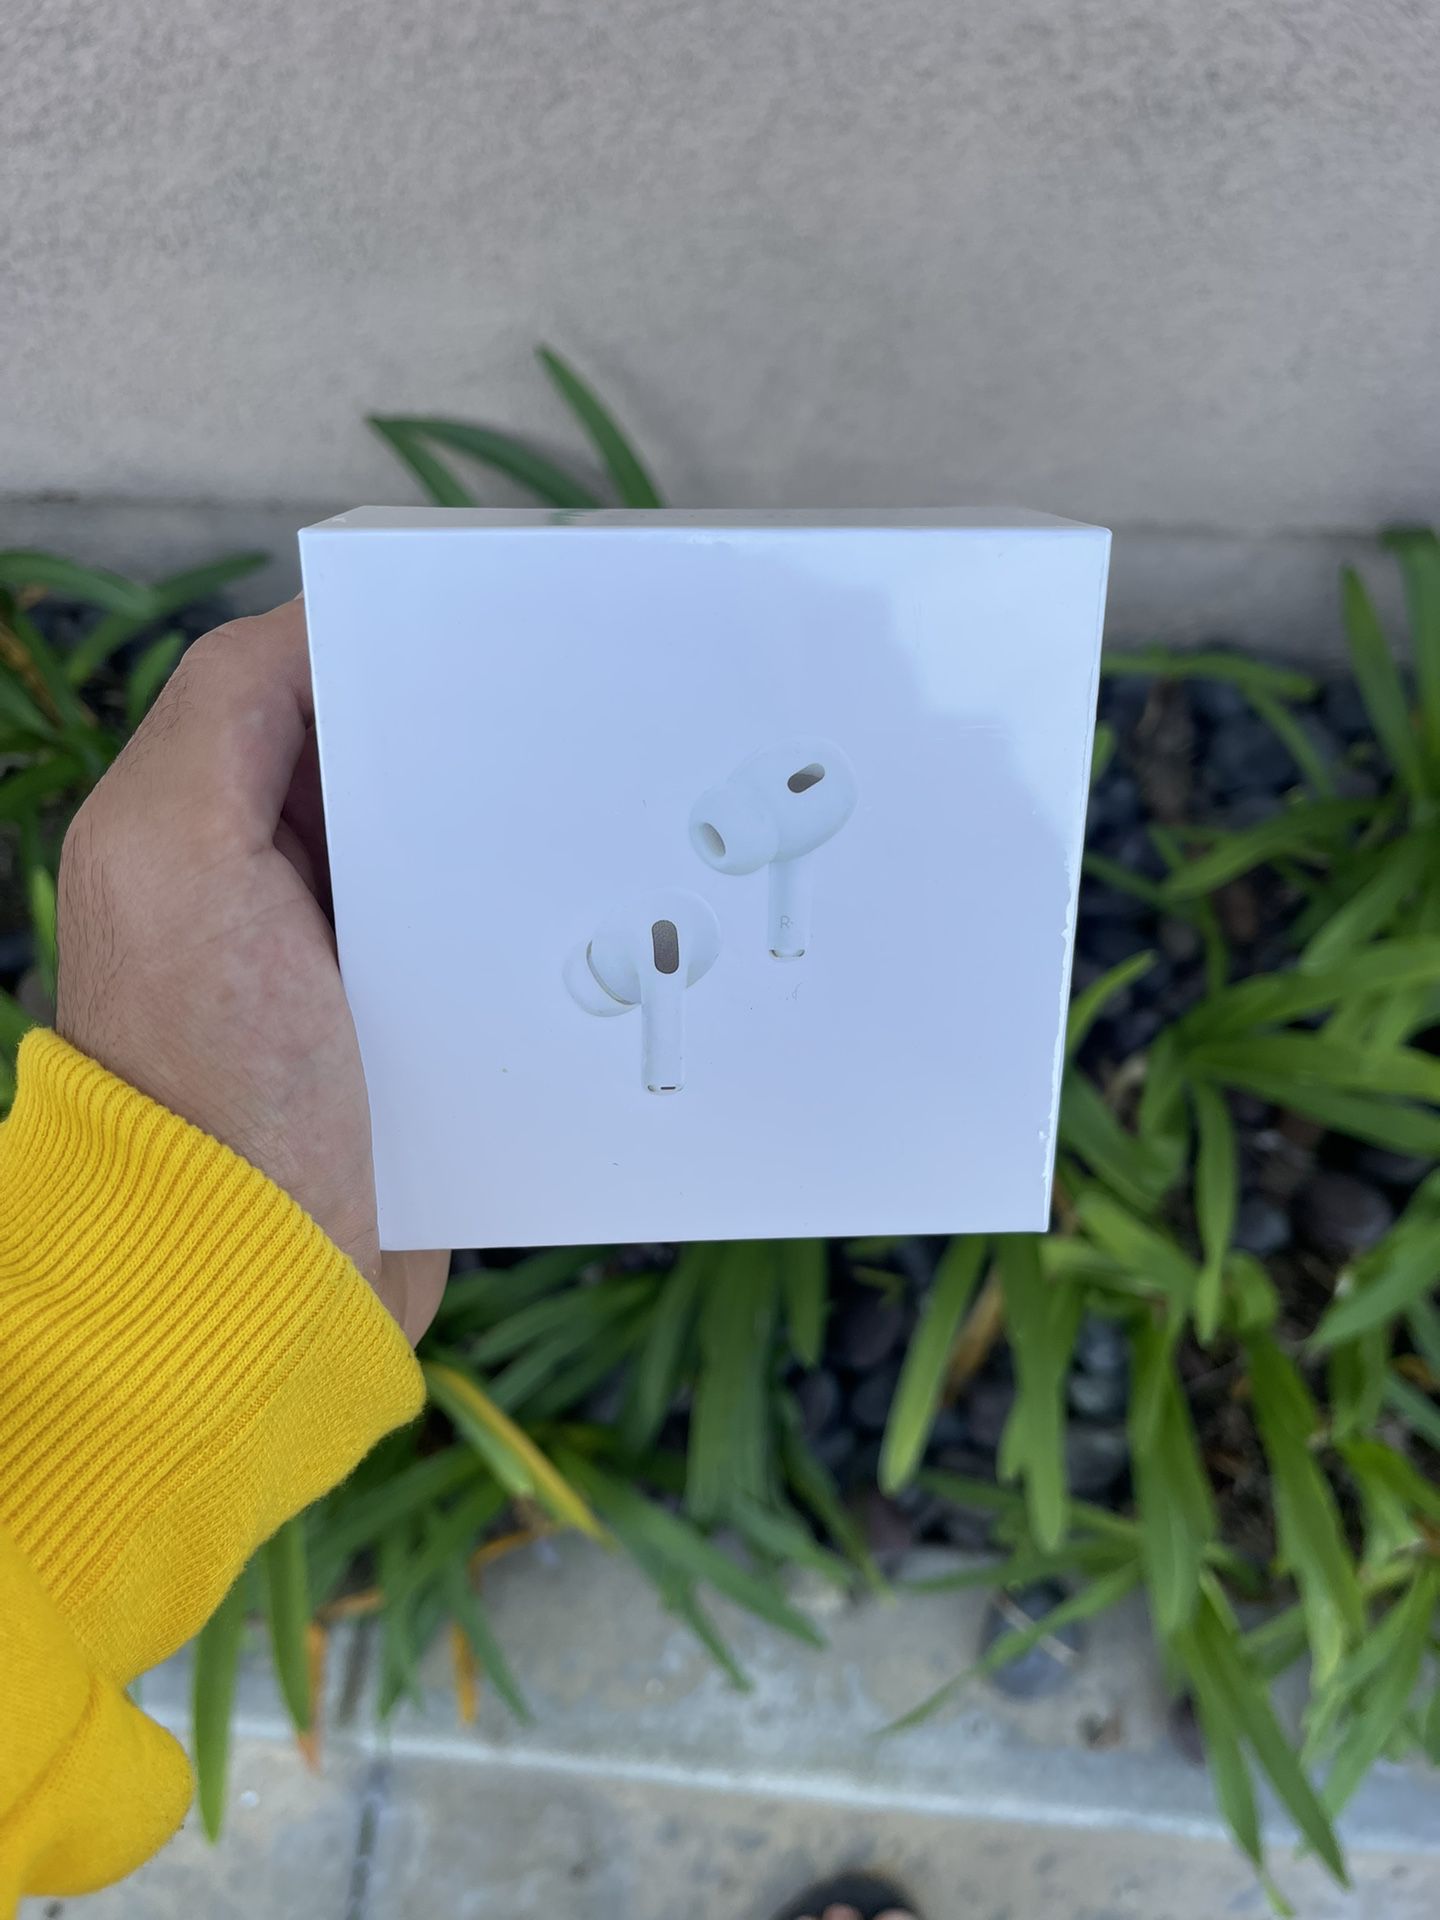 Apple Airpods Pro New Sealed